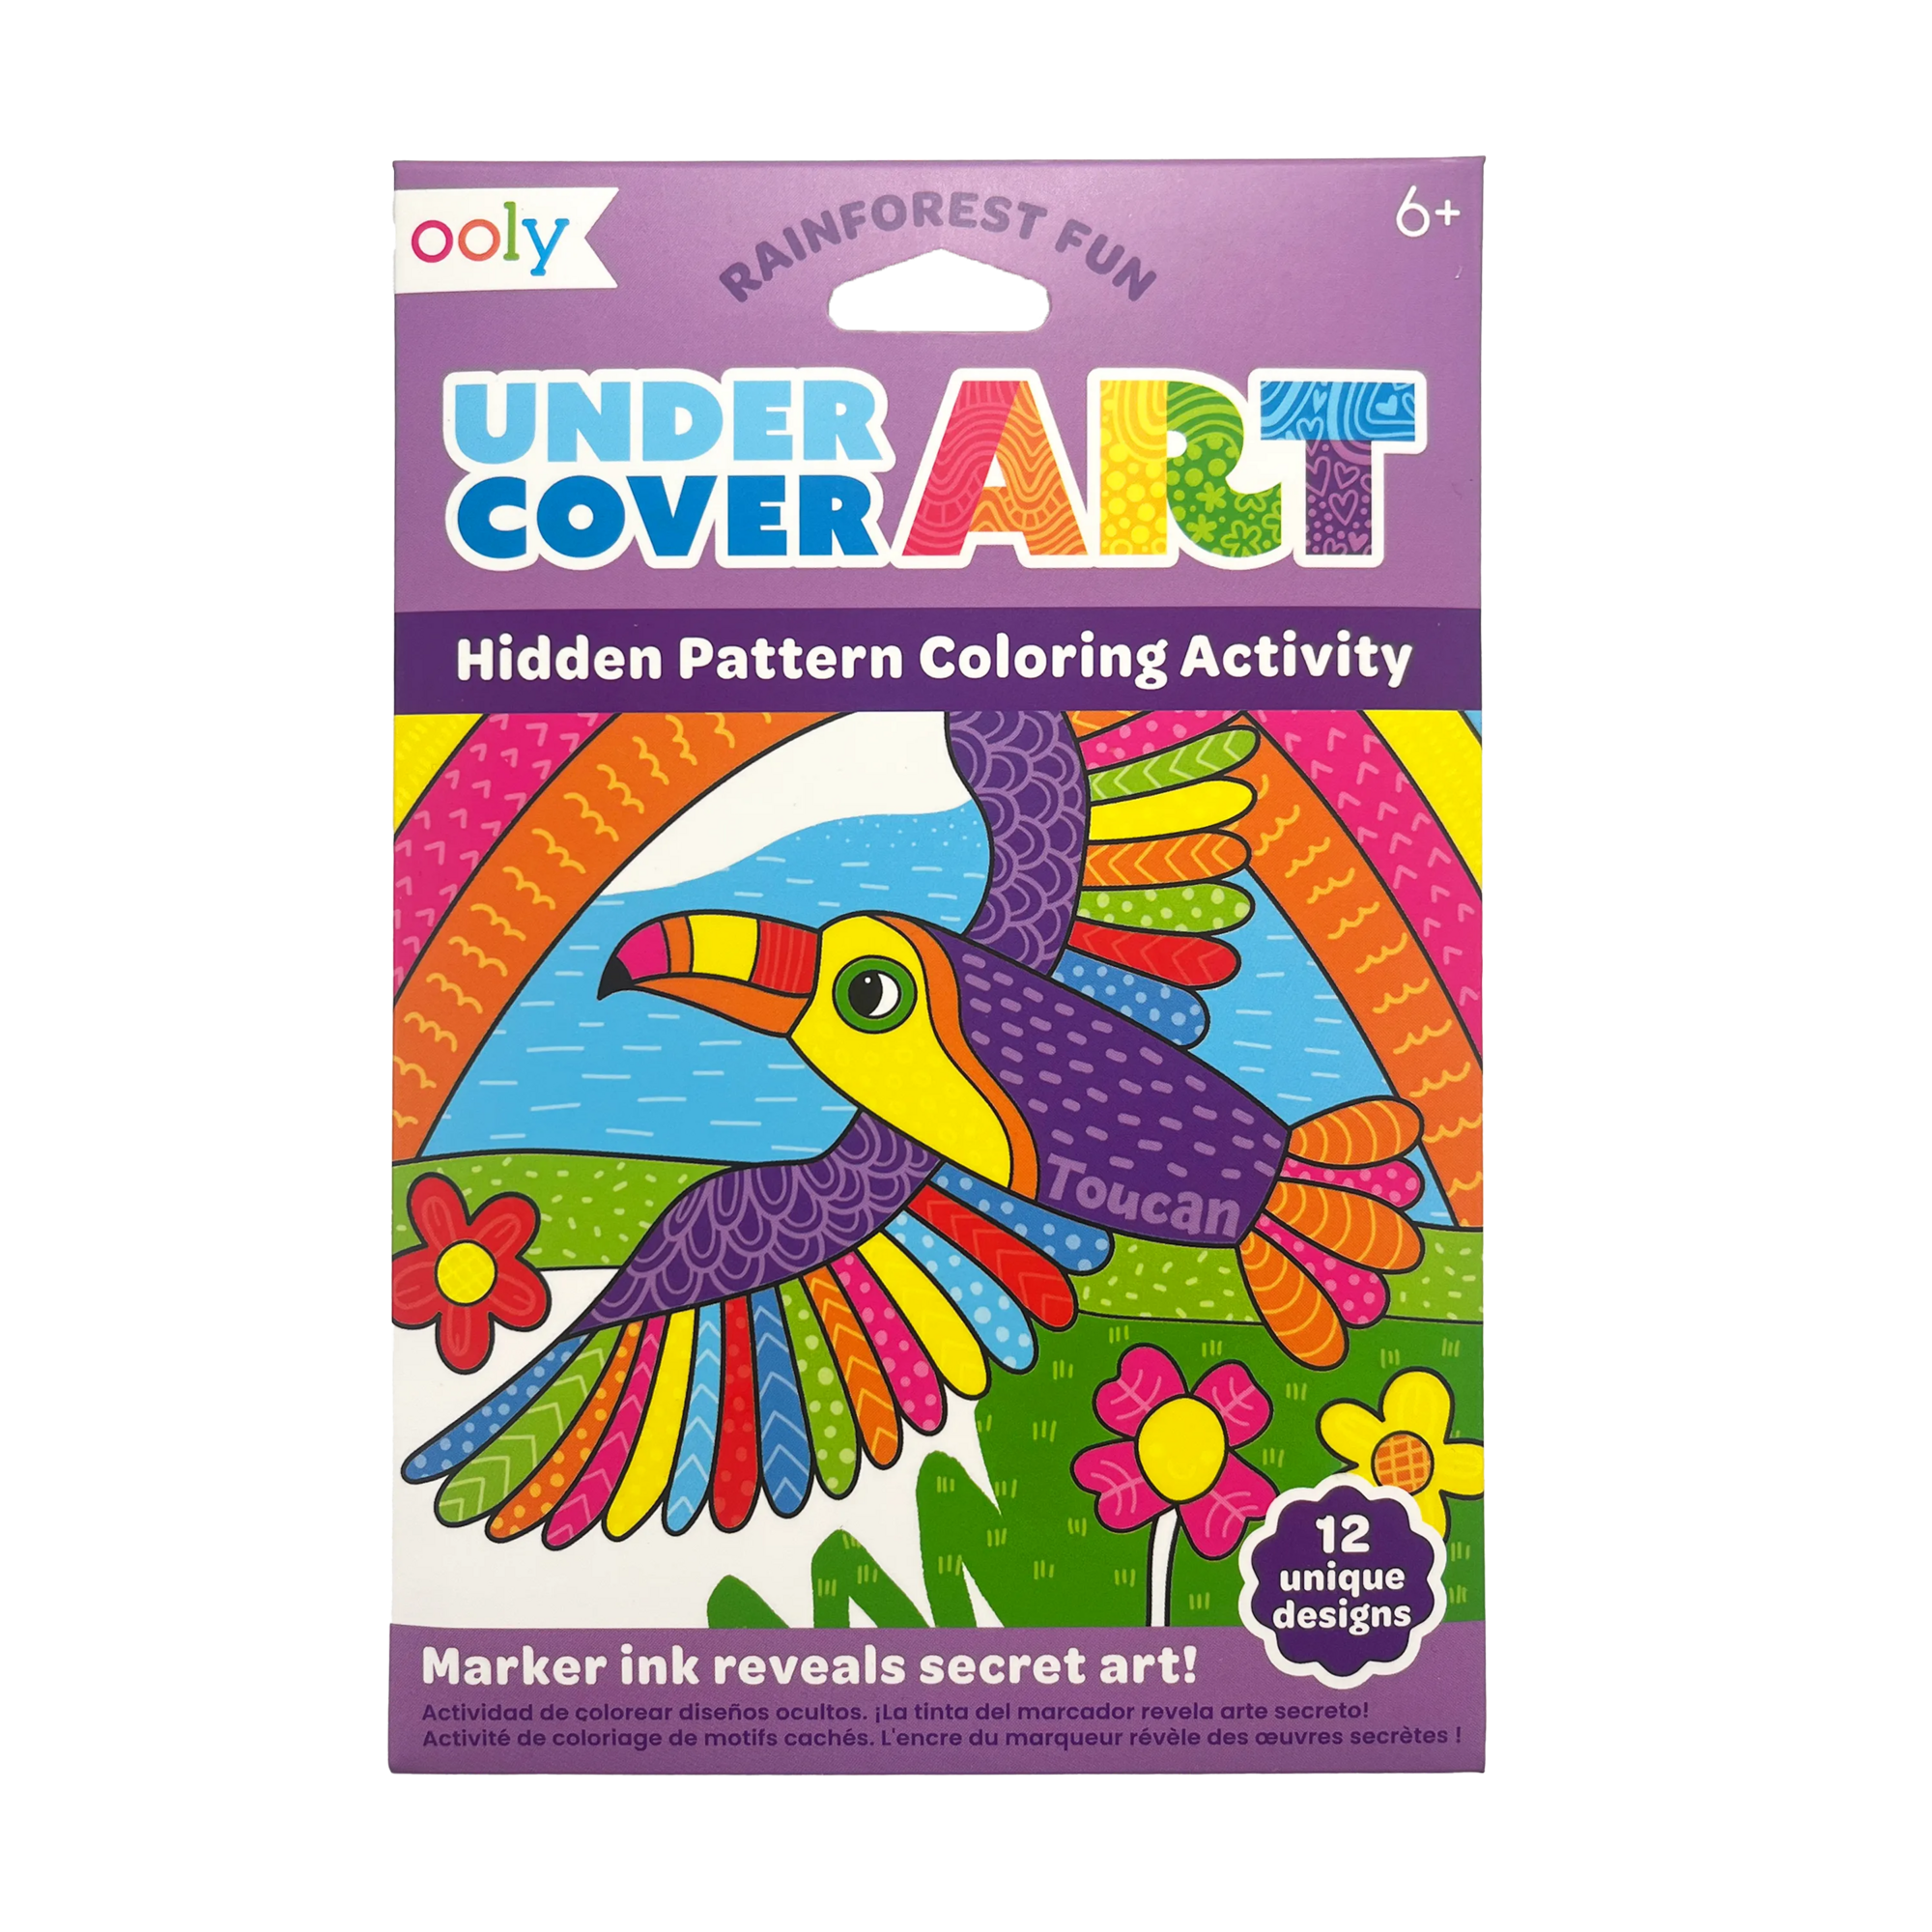 OOLY Undercover Art Hidden Pattern Coloring Activity Art Cards - Rainforest Fun front of packaging